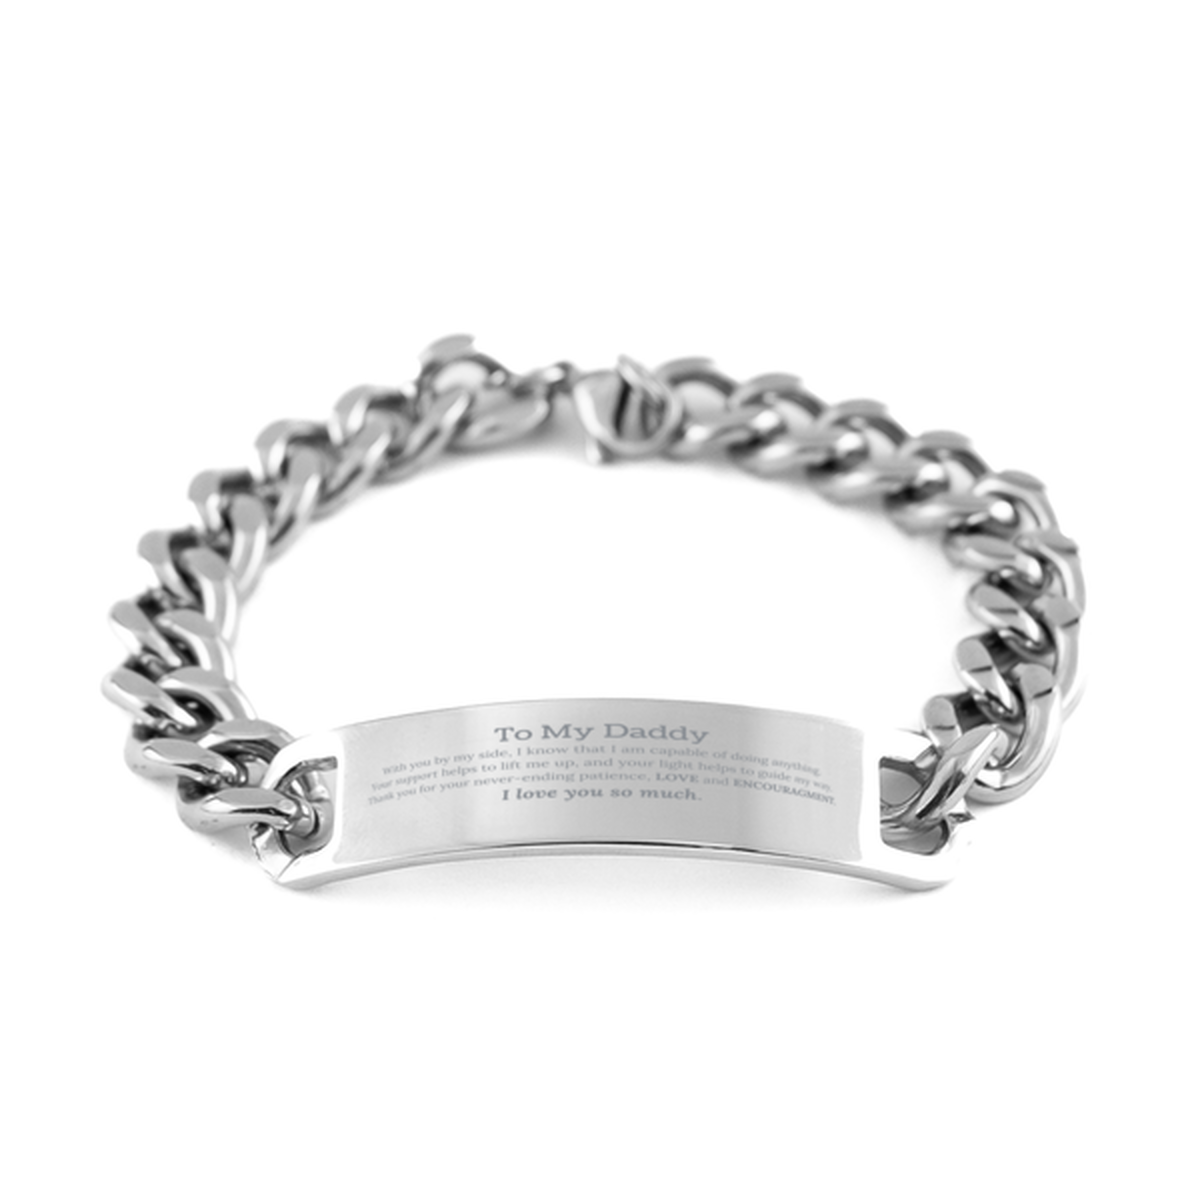 Appreciation Daddy Cuban Chain Stainless Steel Bracelet Gifts, To My Daddy Birthday Christmas Wedding Keepsake Gifts for Daddy With you by my side, I know that I am capable of doing anything. I love you so much